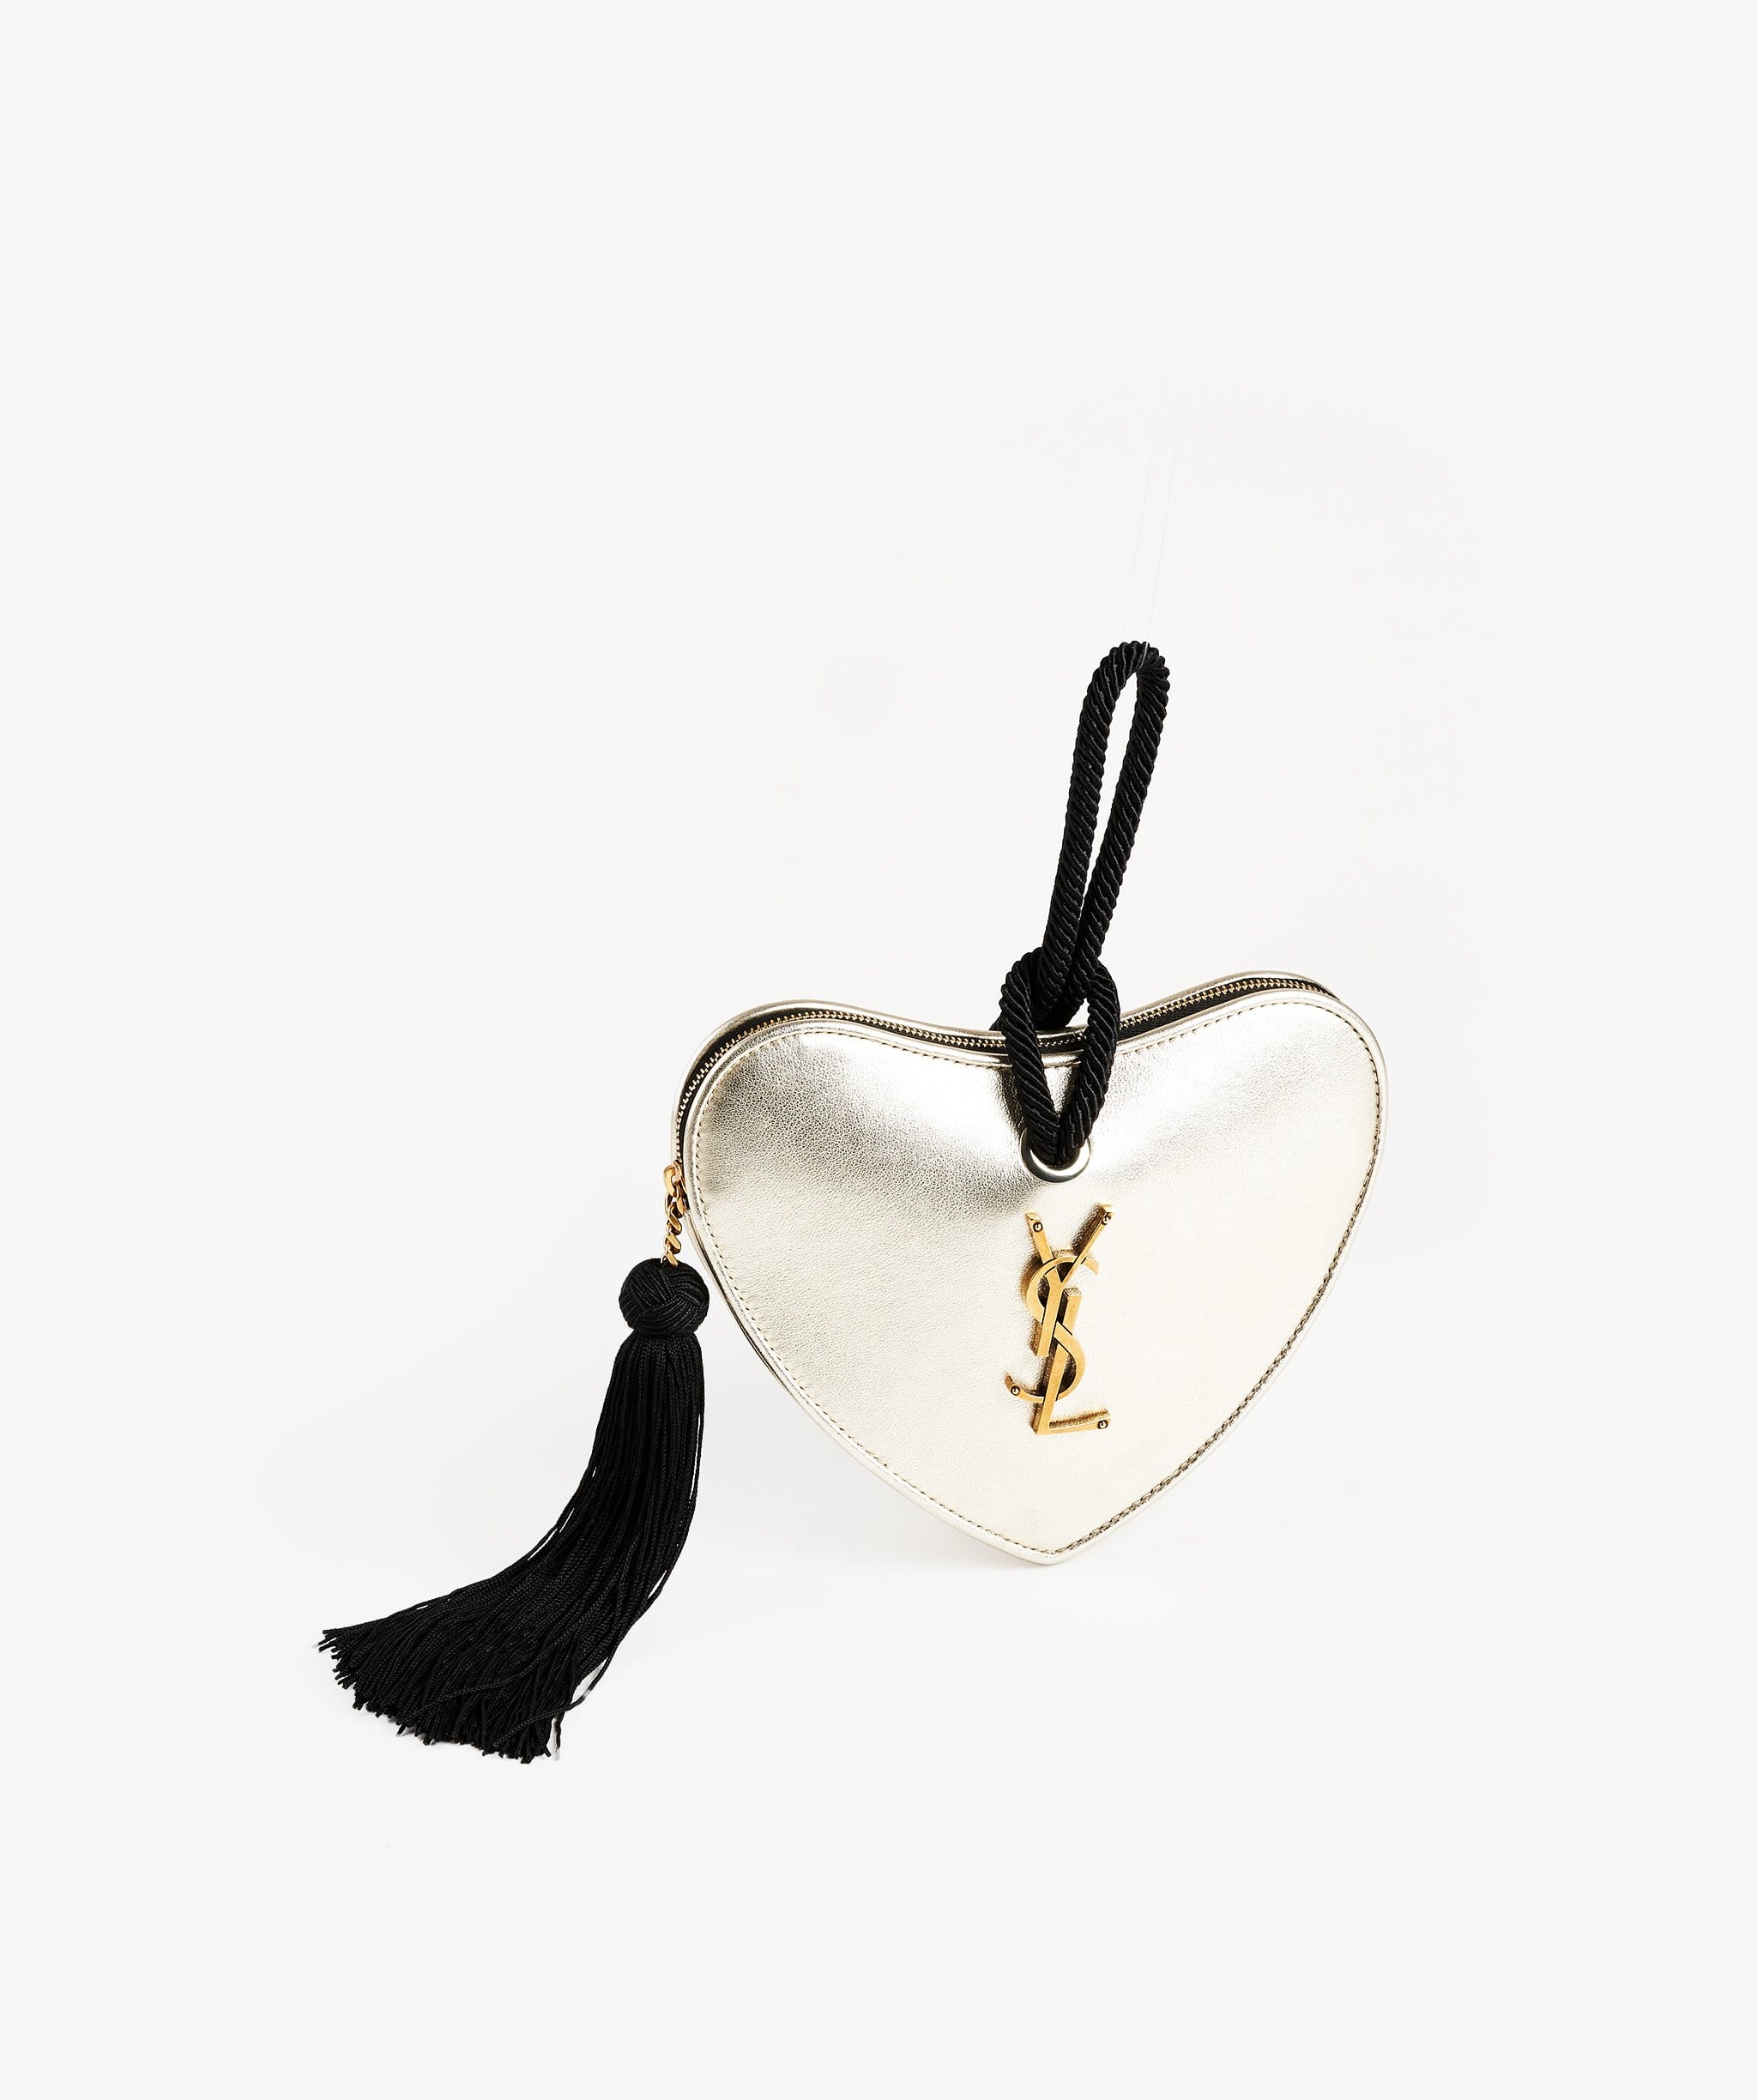 Yves Saint Laurent, Bags, White And Gold Ysl Clutch Bag